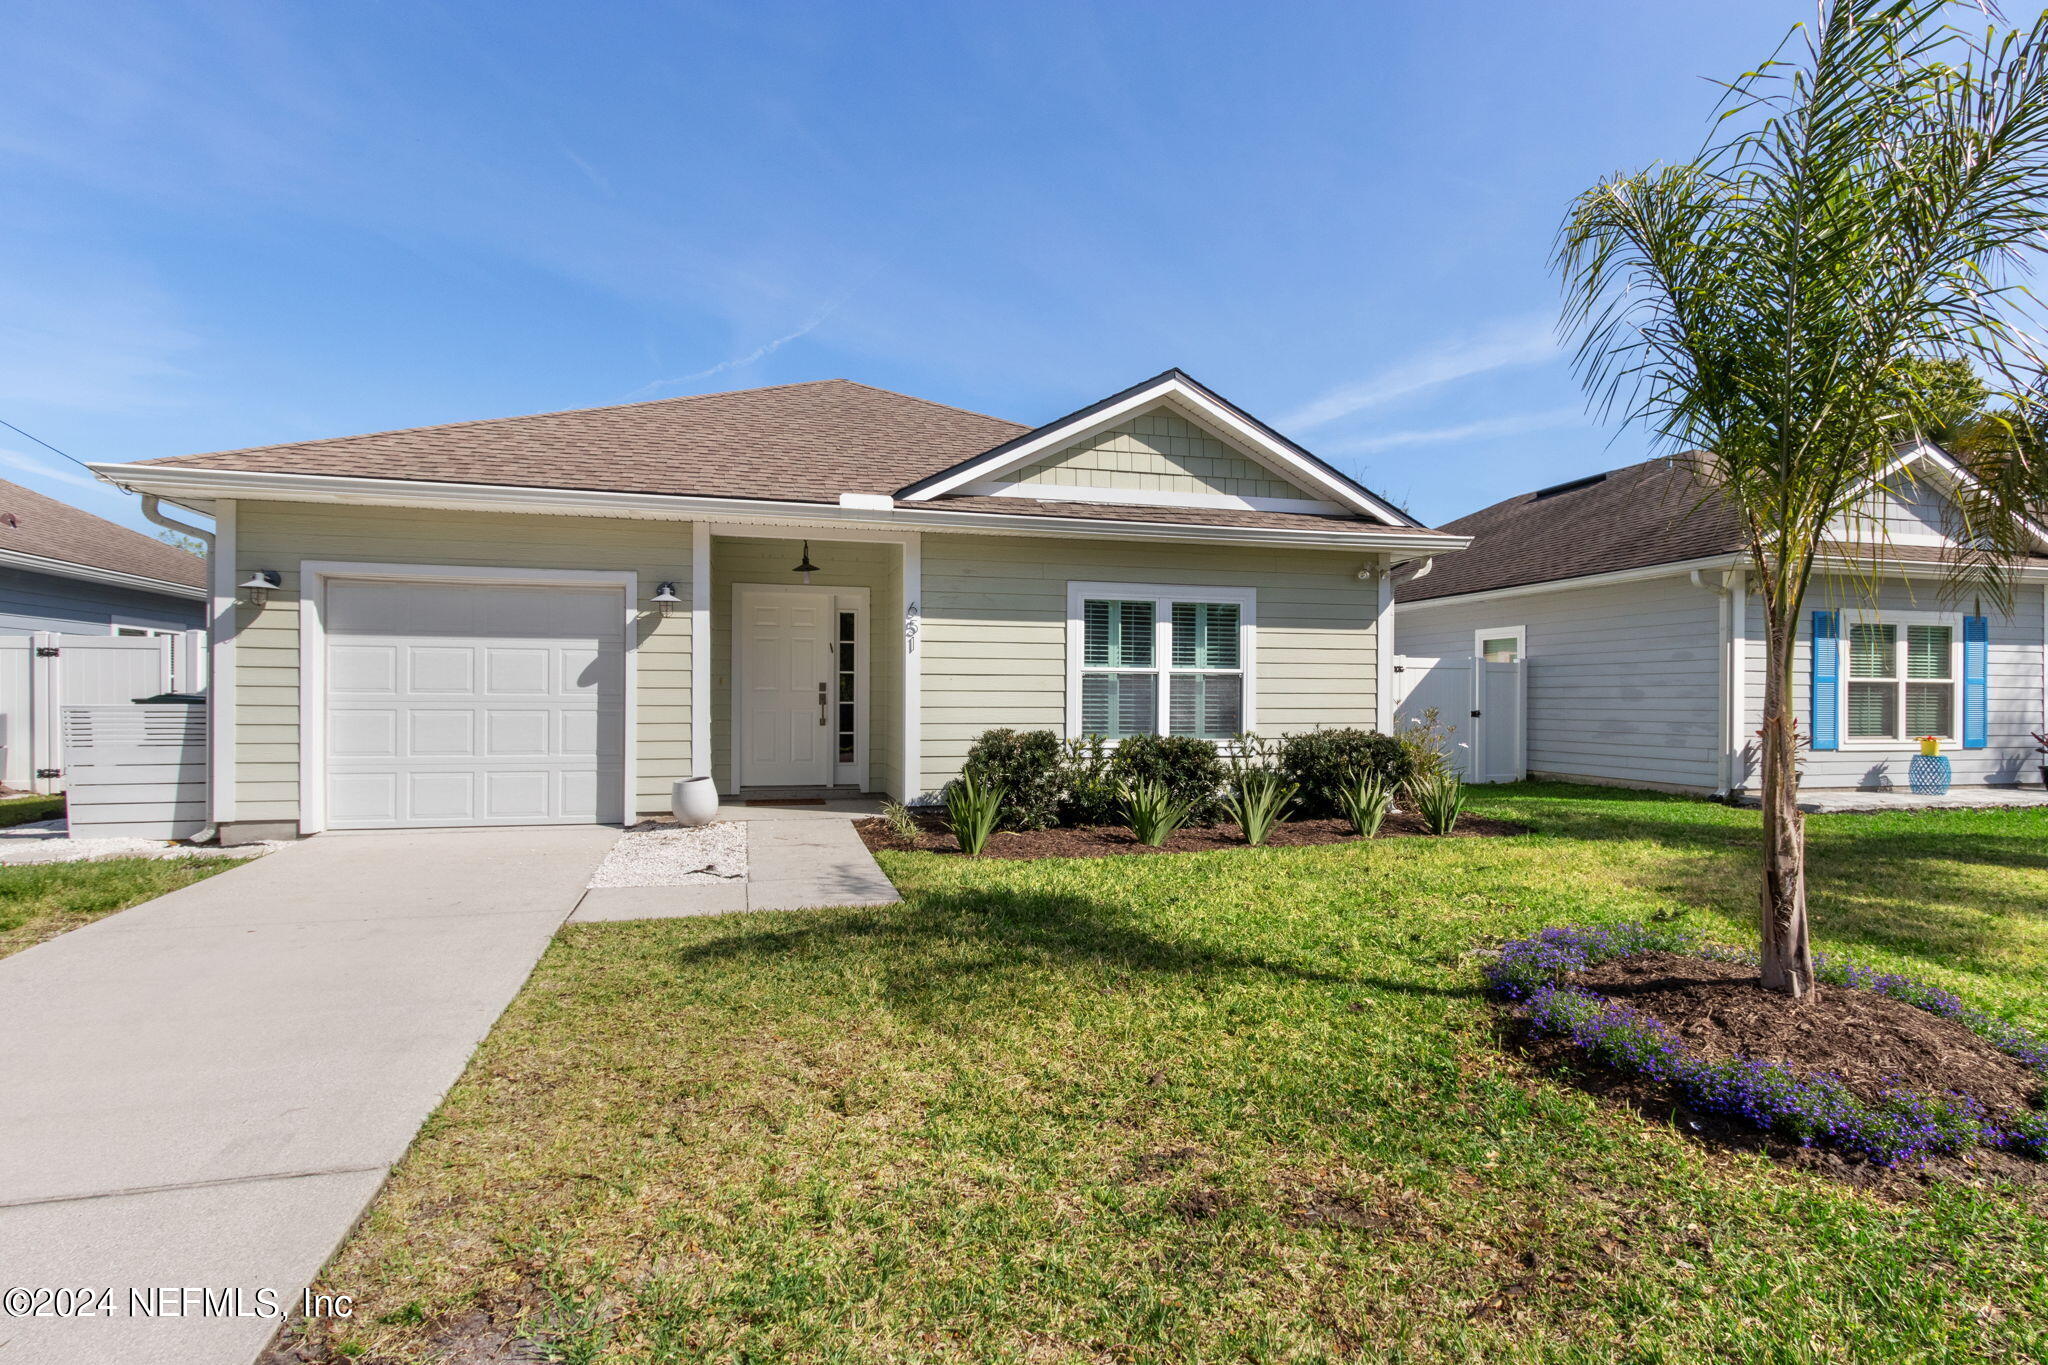 Jacksonville Beach, FL home for sale located at 651 UPPER 8TH Avenue S, Jacksonville Beach, FL 32250